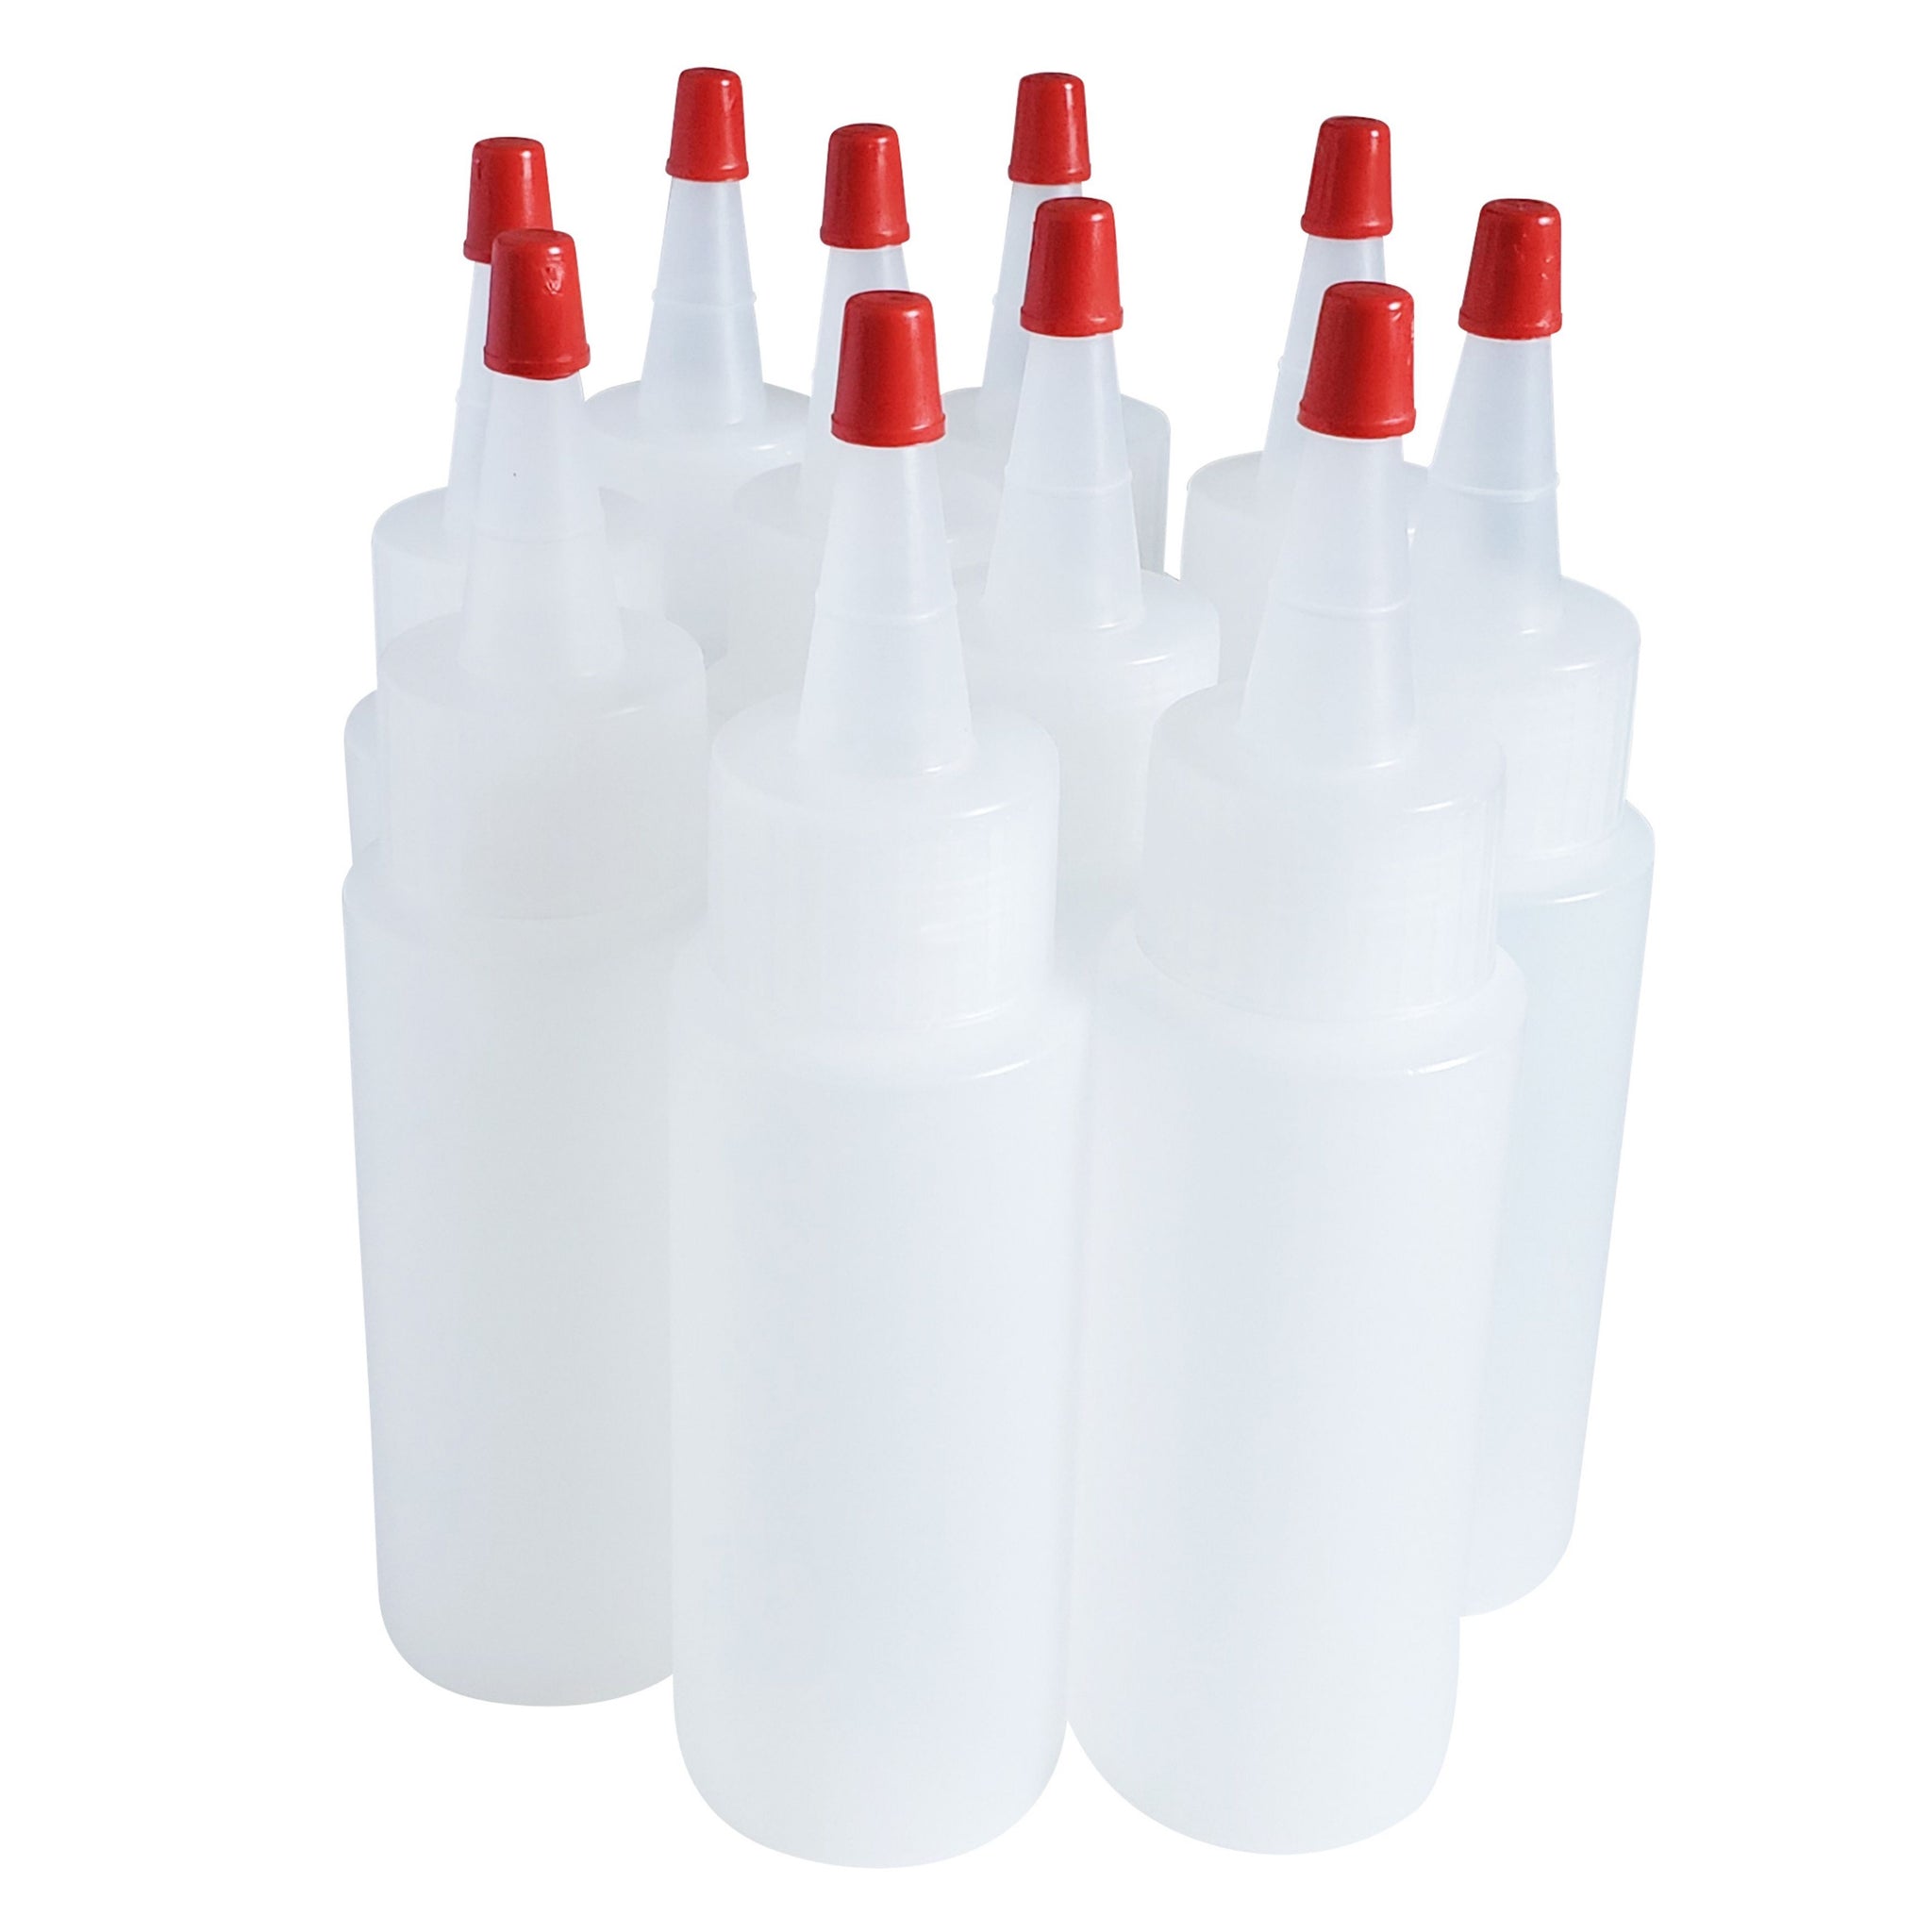  Small Squeeze Bottles